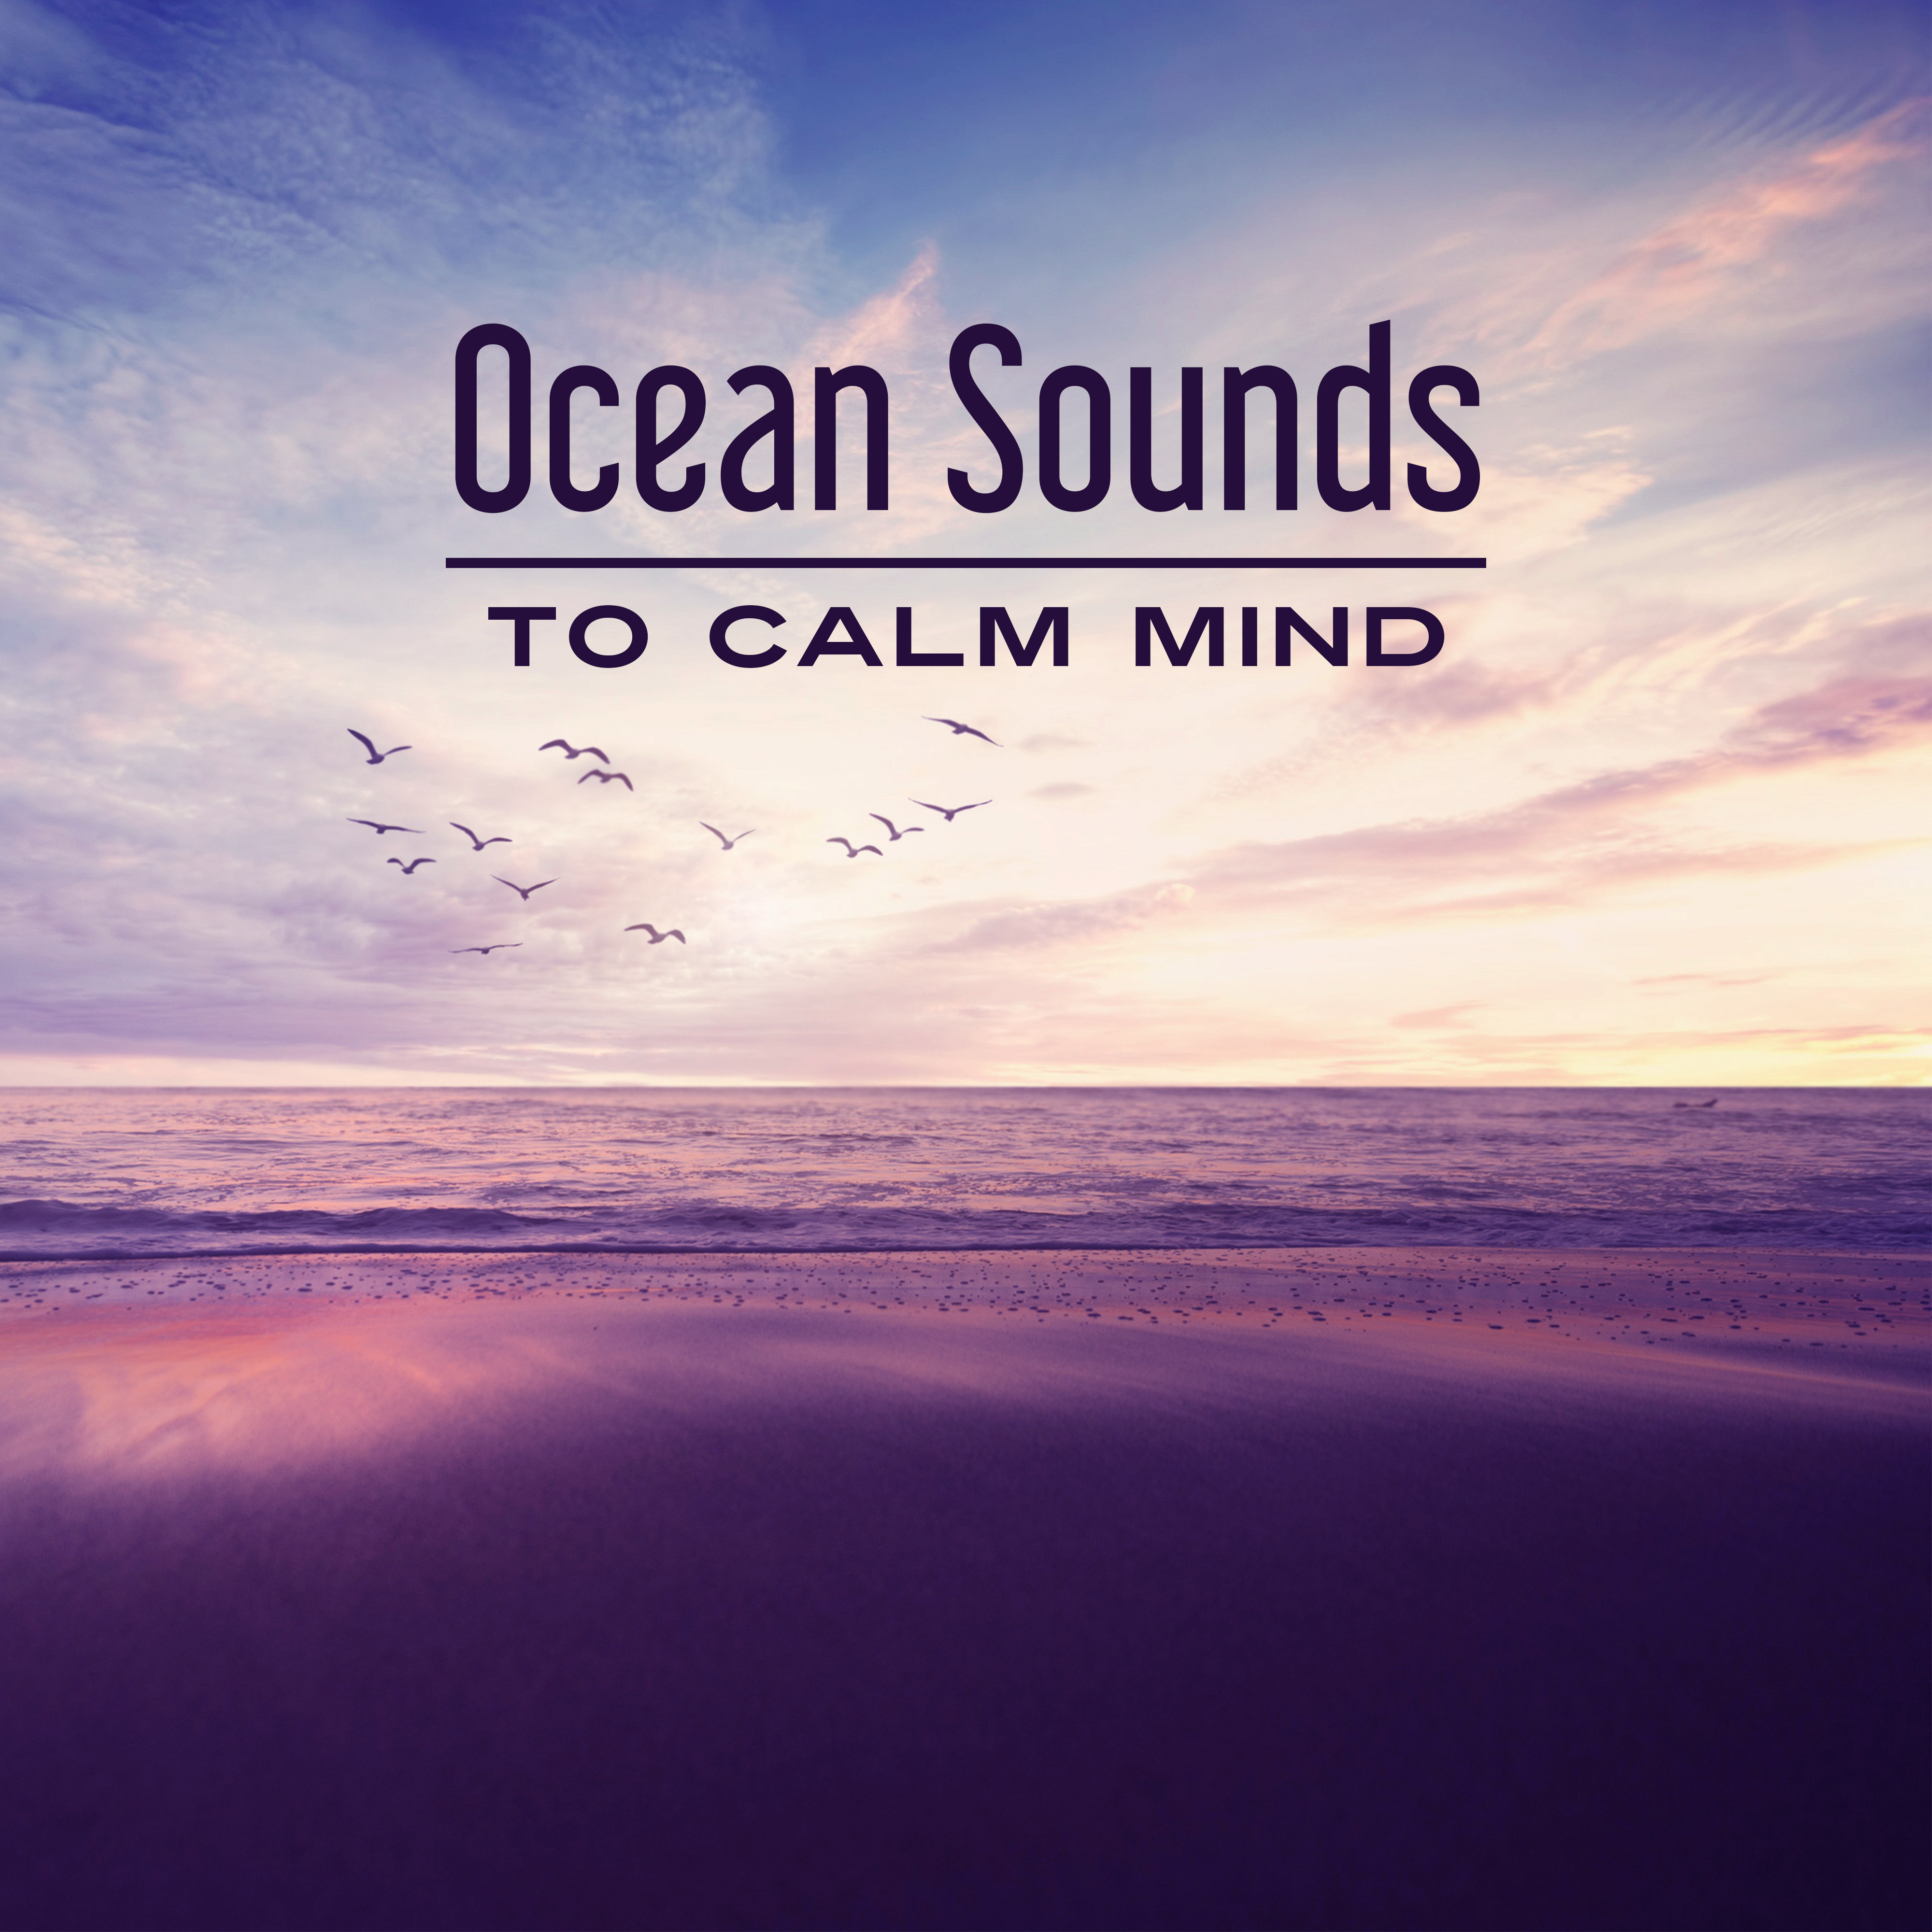 Ocean Sounds to Calm Mind – Stress Relief, Inner Relaxation, Peaceful Waves, Water Sounds, Music to Rest